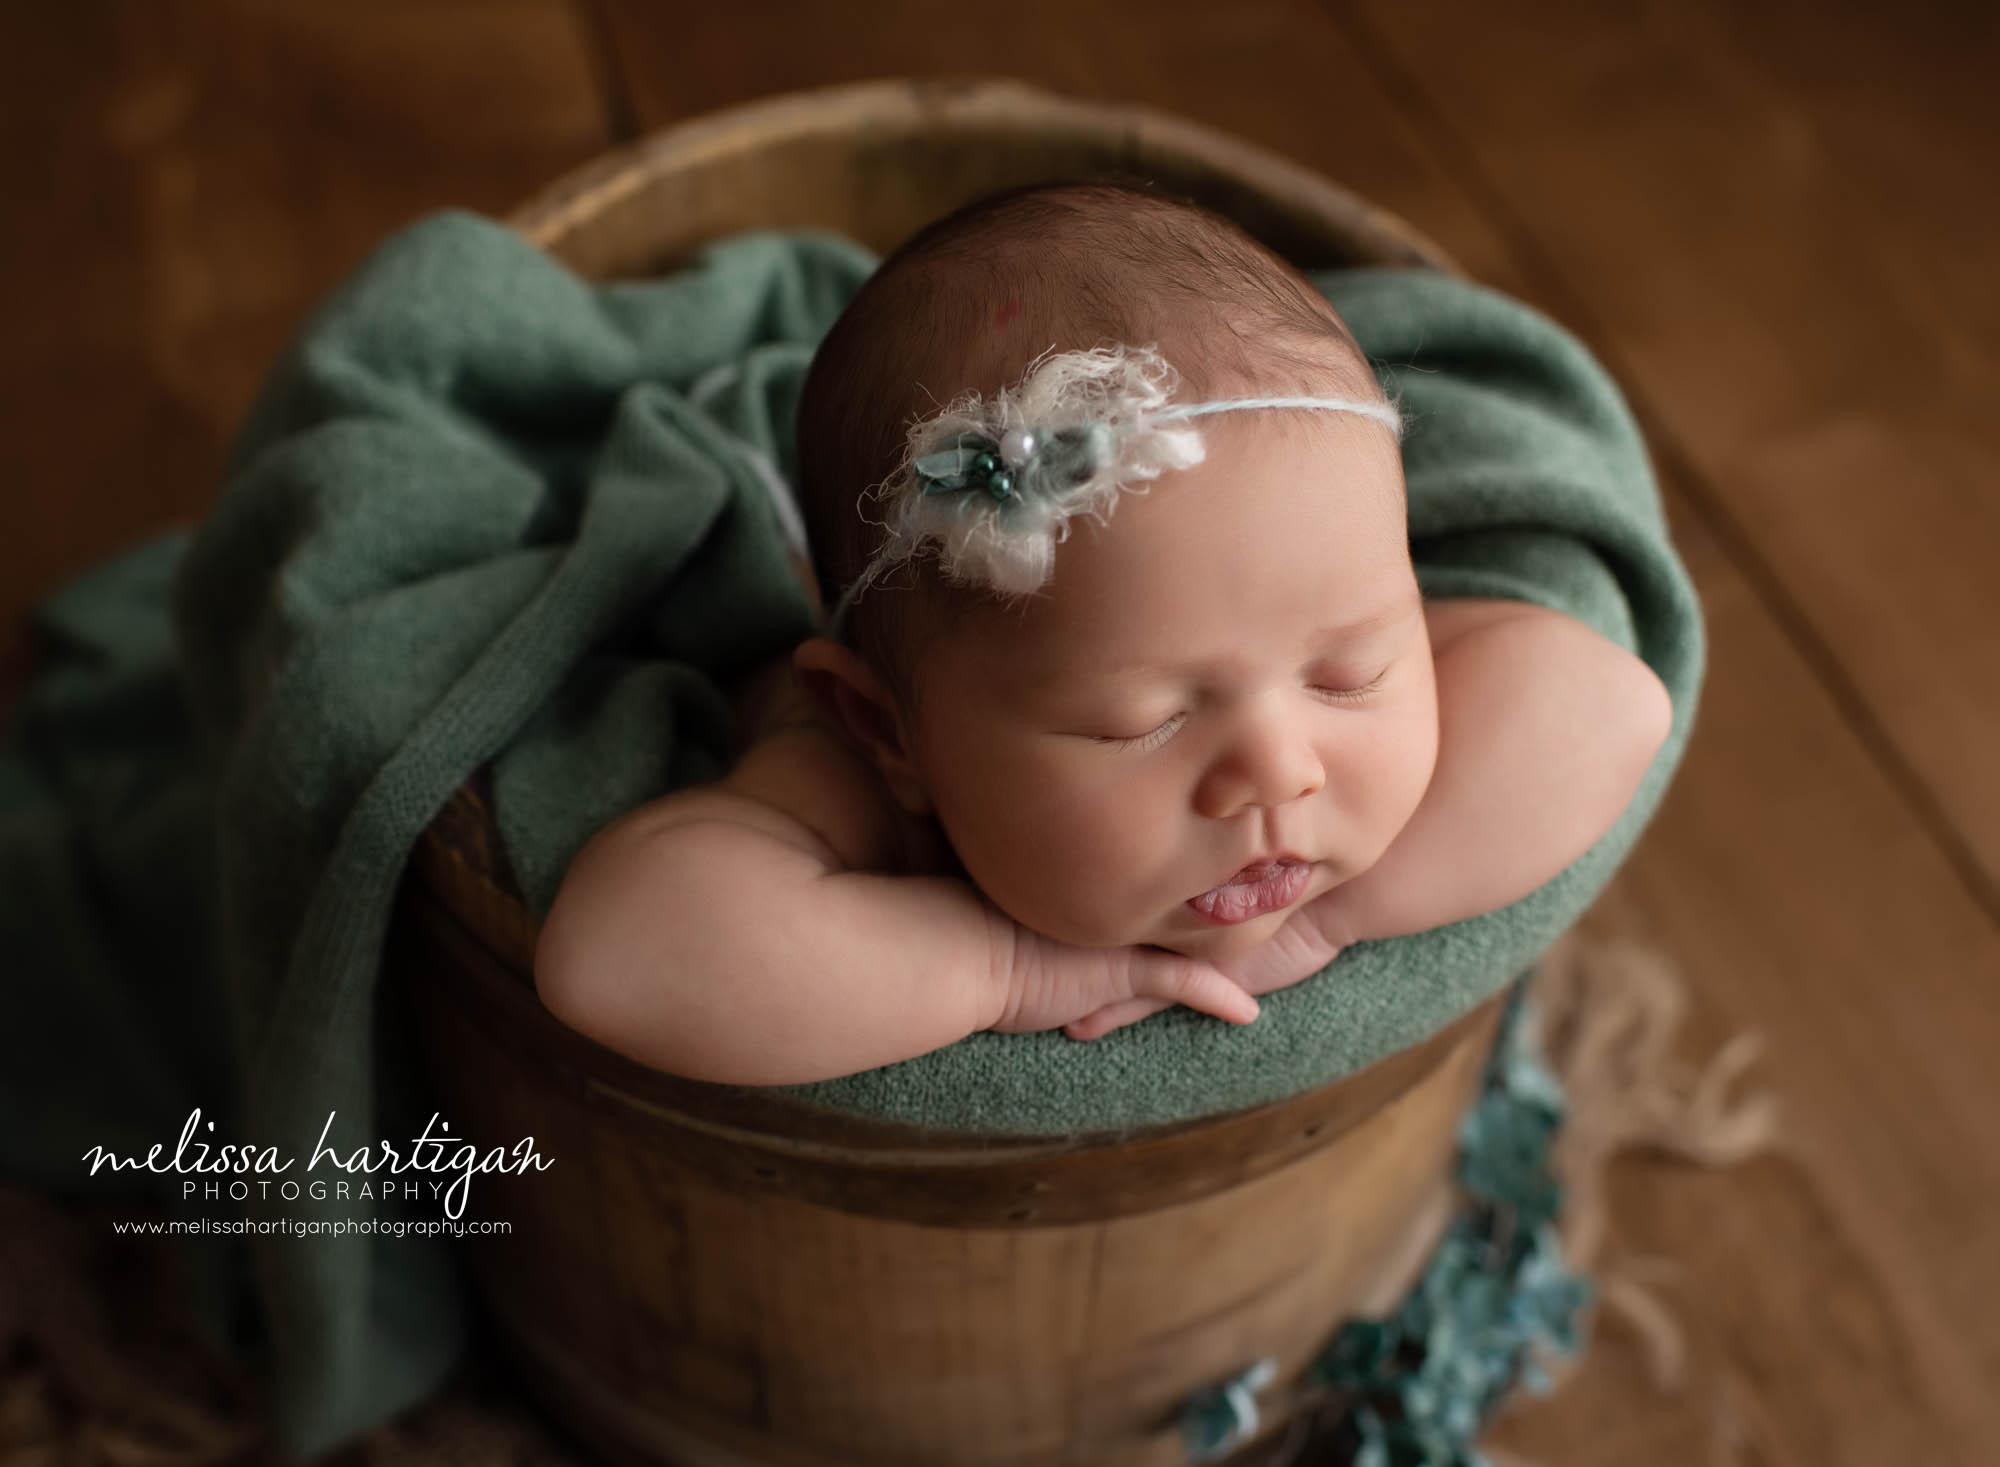 baby girl posed with chin on hands in rustic wooden bucket with shades of green colors